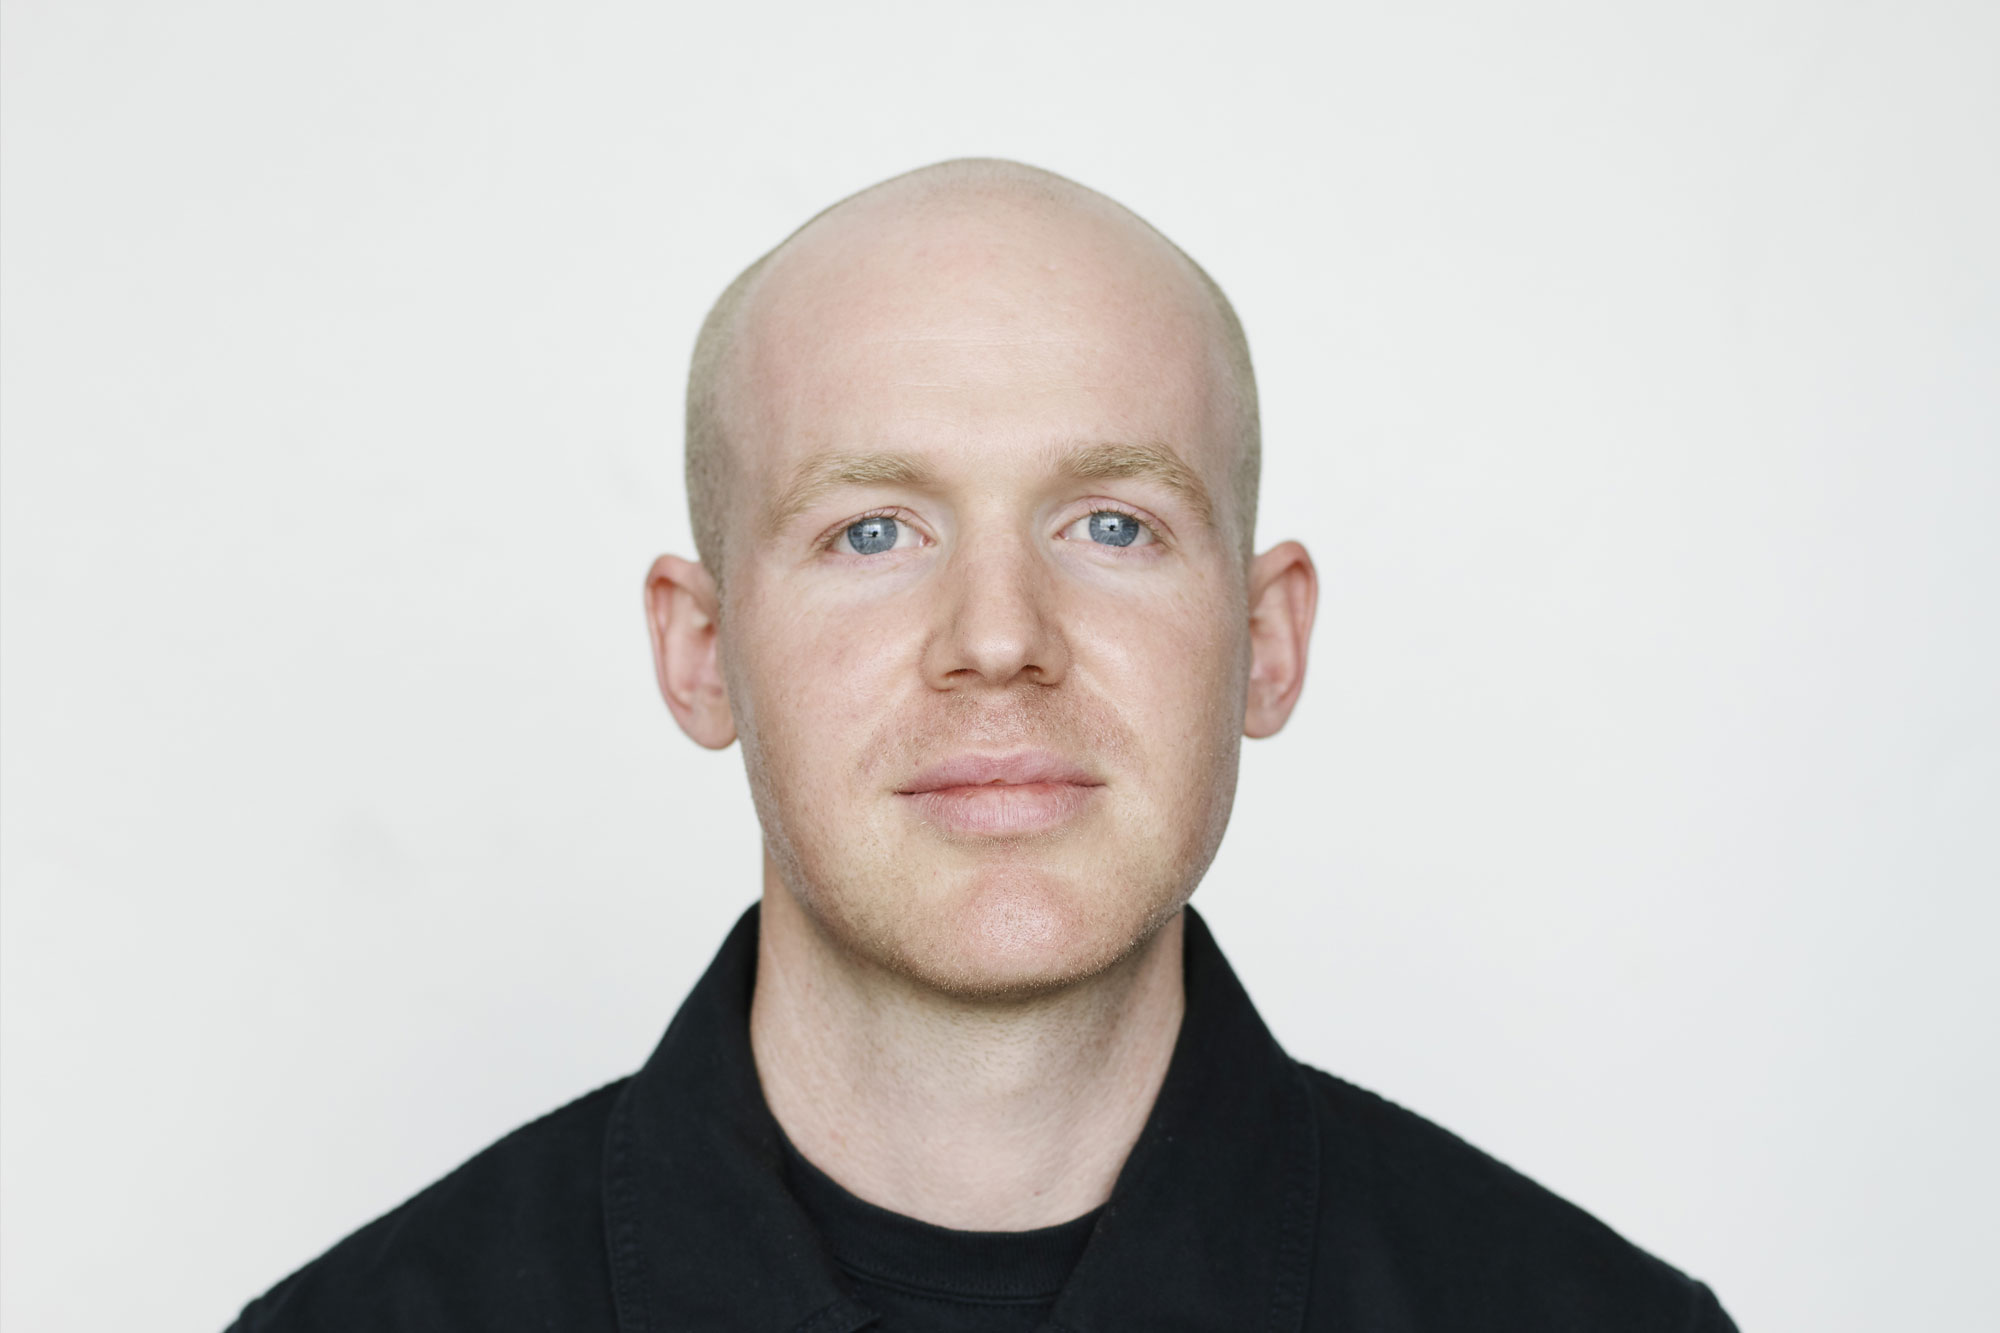 A person with closely-cropped fine hair on their crown and no hair on the top of their head, blue eyes, white skin. They are wearing a black button-up shirt and are sitting in front of a white wall.